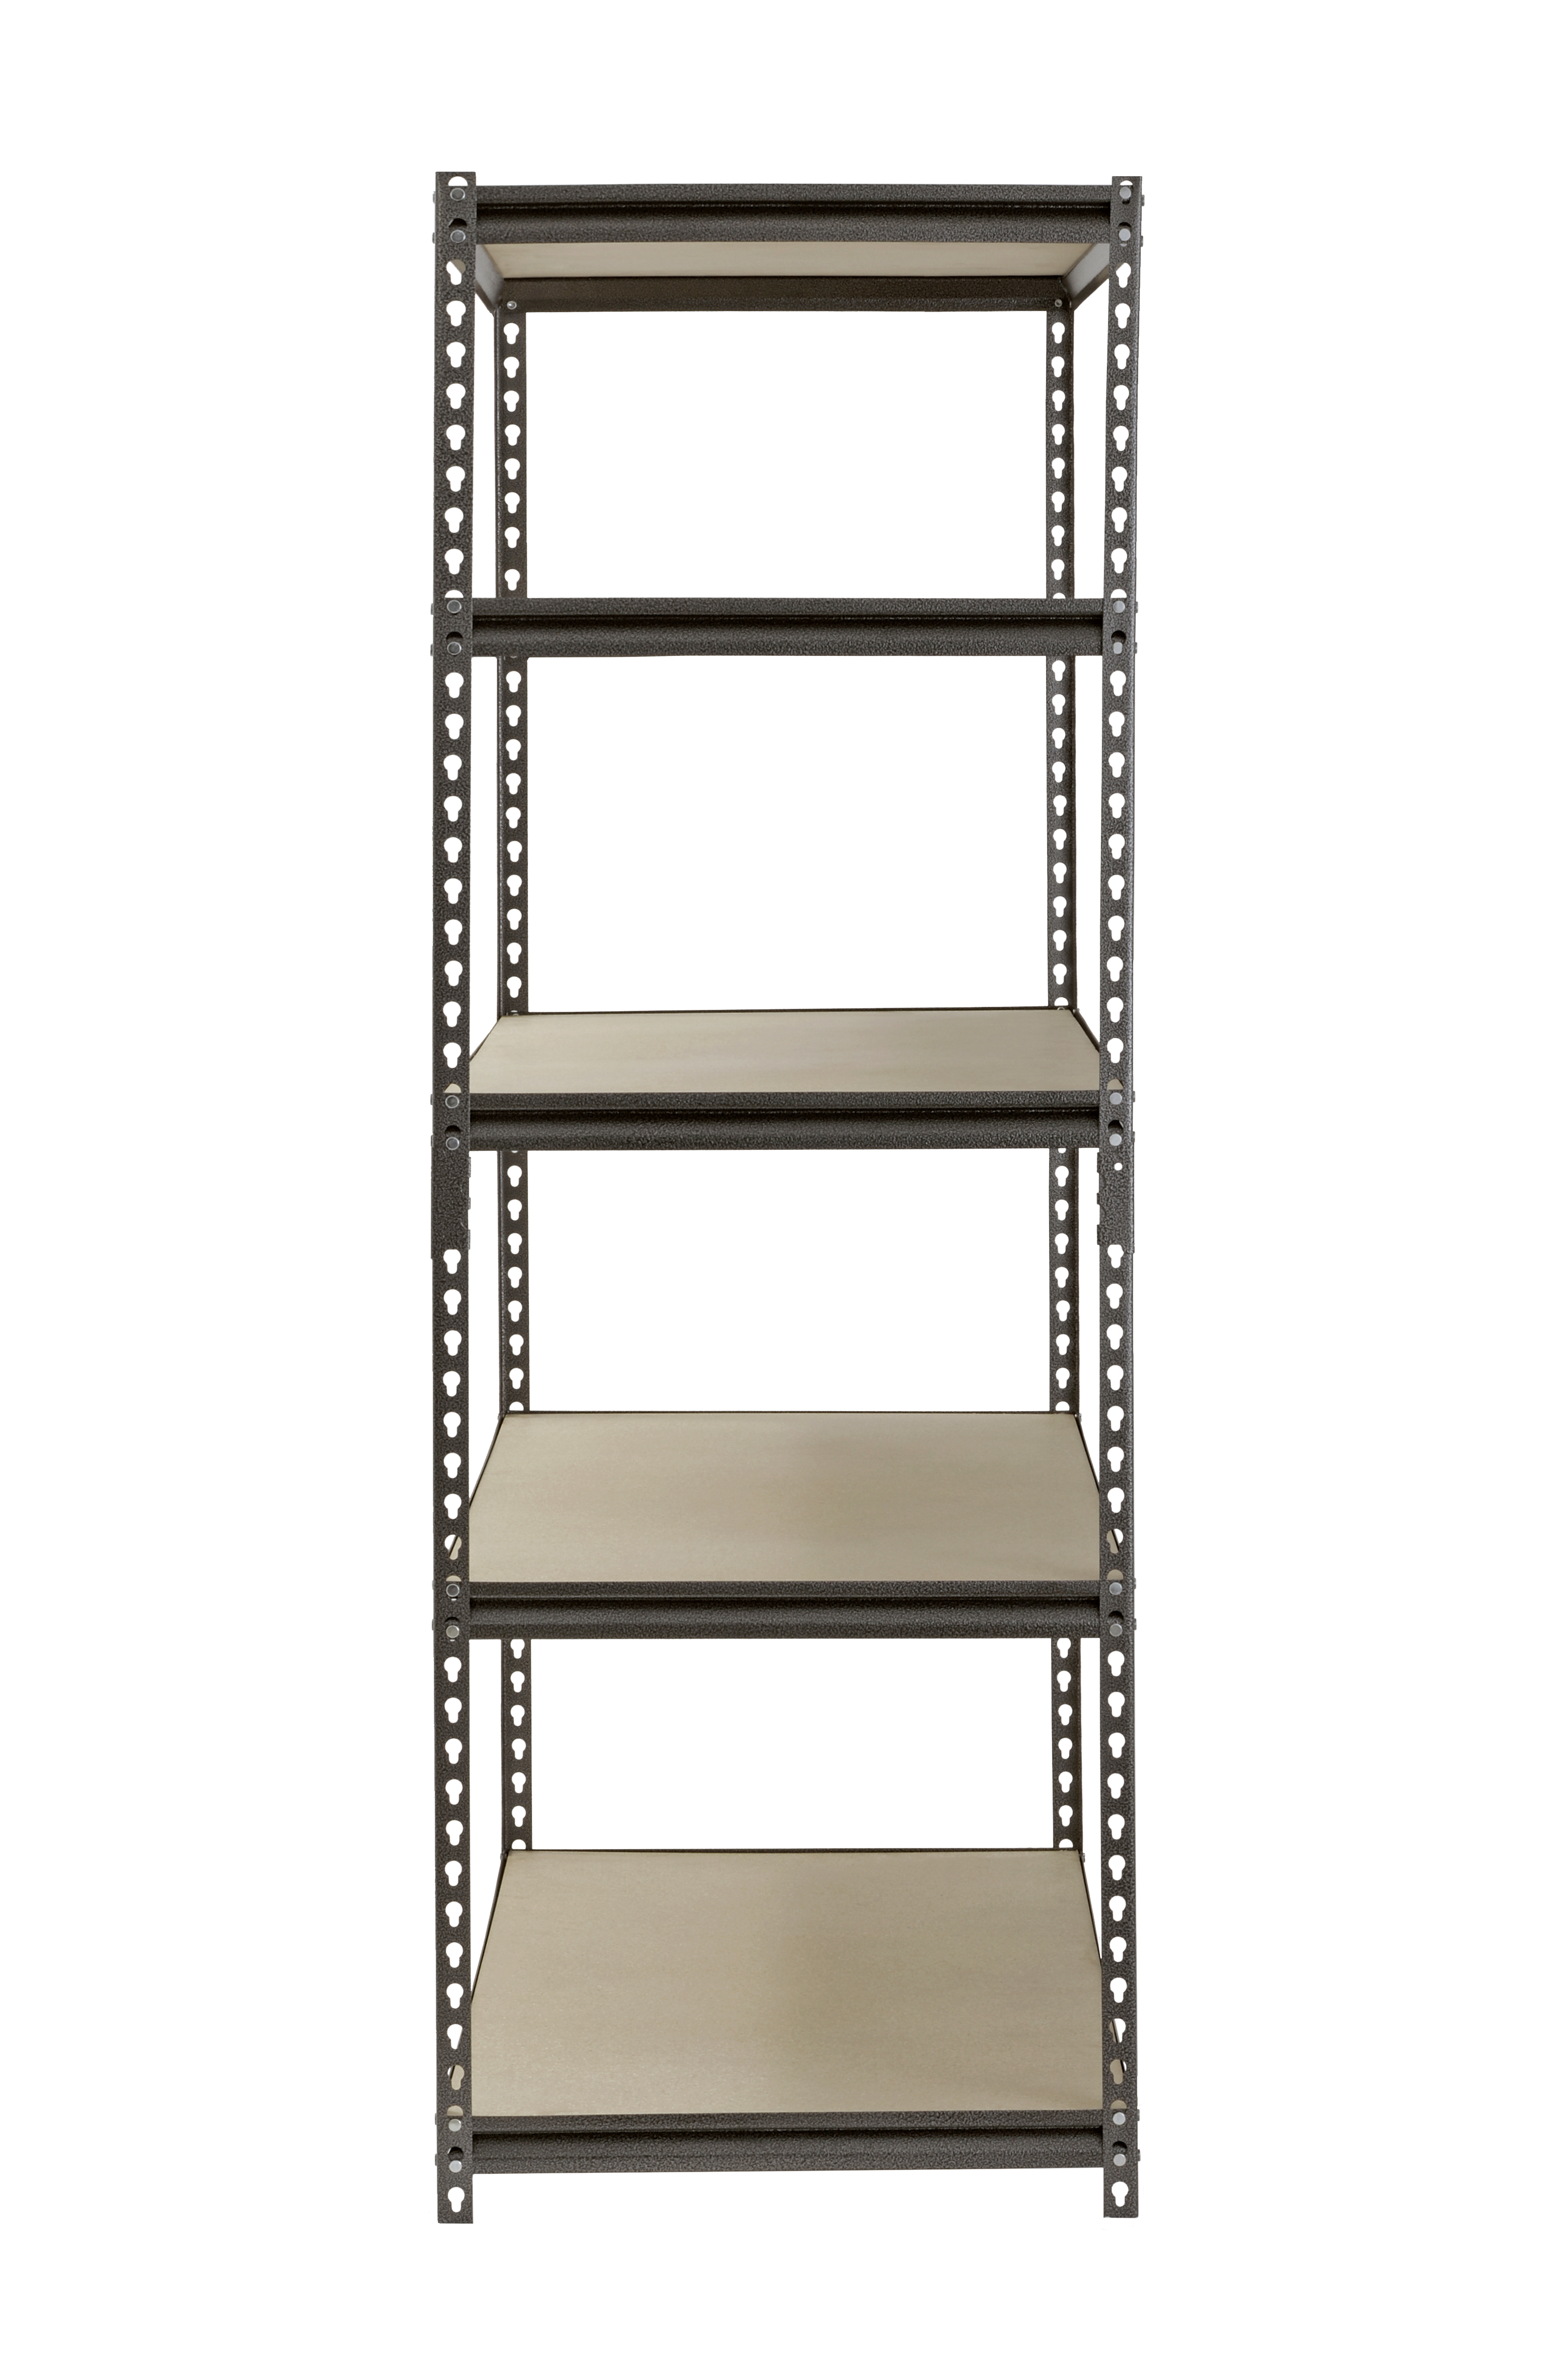 Muscle Rack 48"W x 24"D x 72"H 5-Tier Steel Shelving; 4,000 lb. Total Capacity; Silver - image 3 of 7